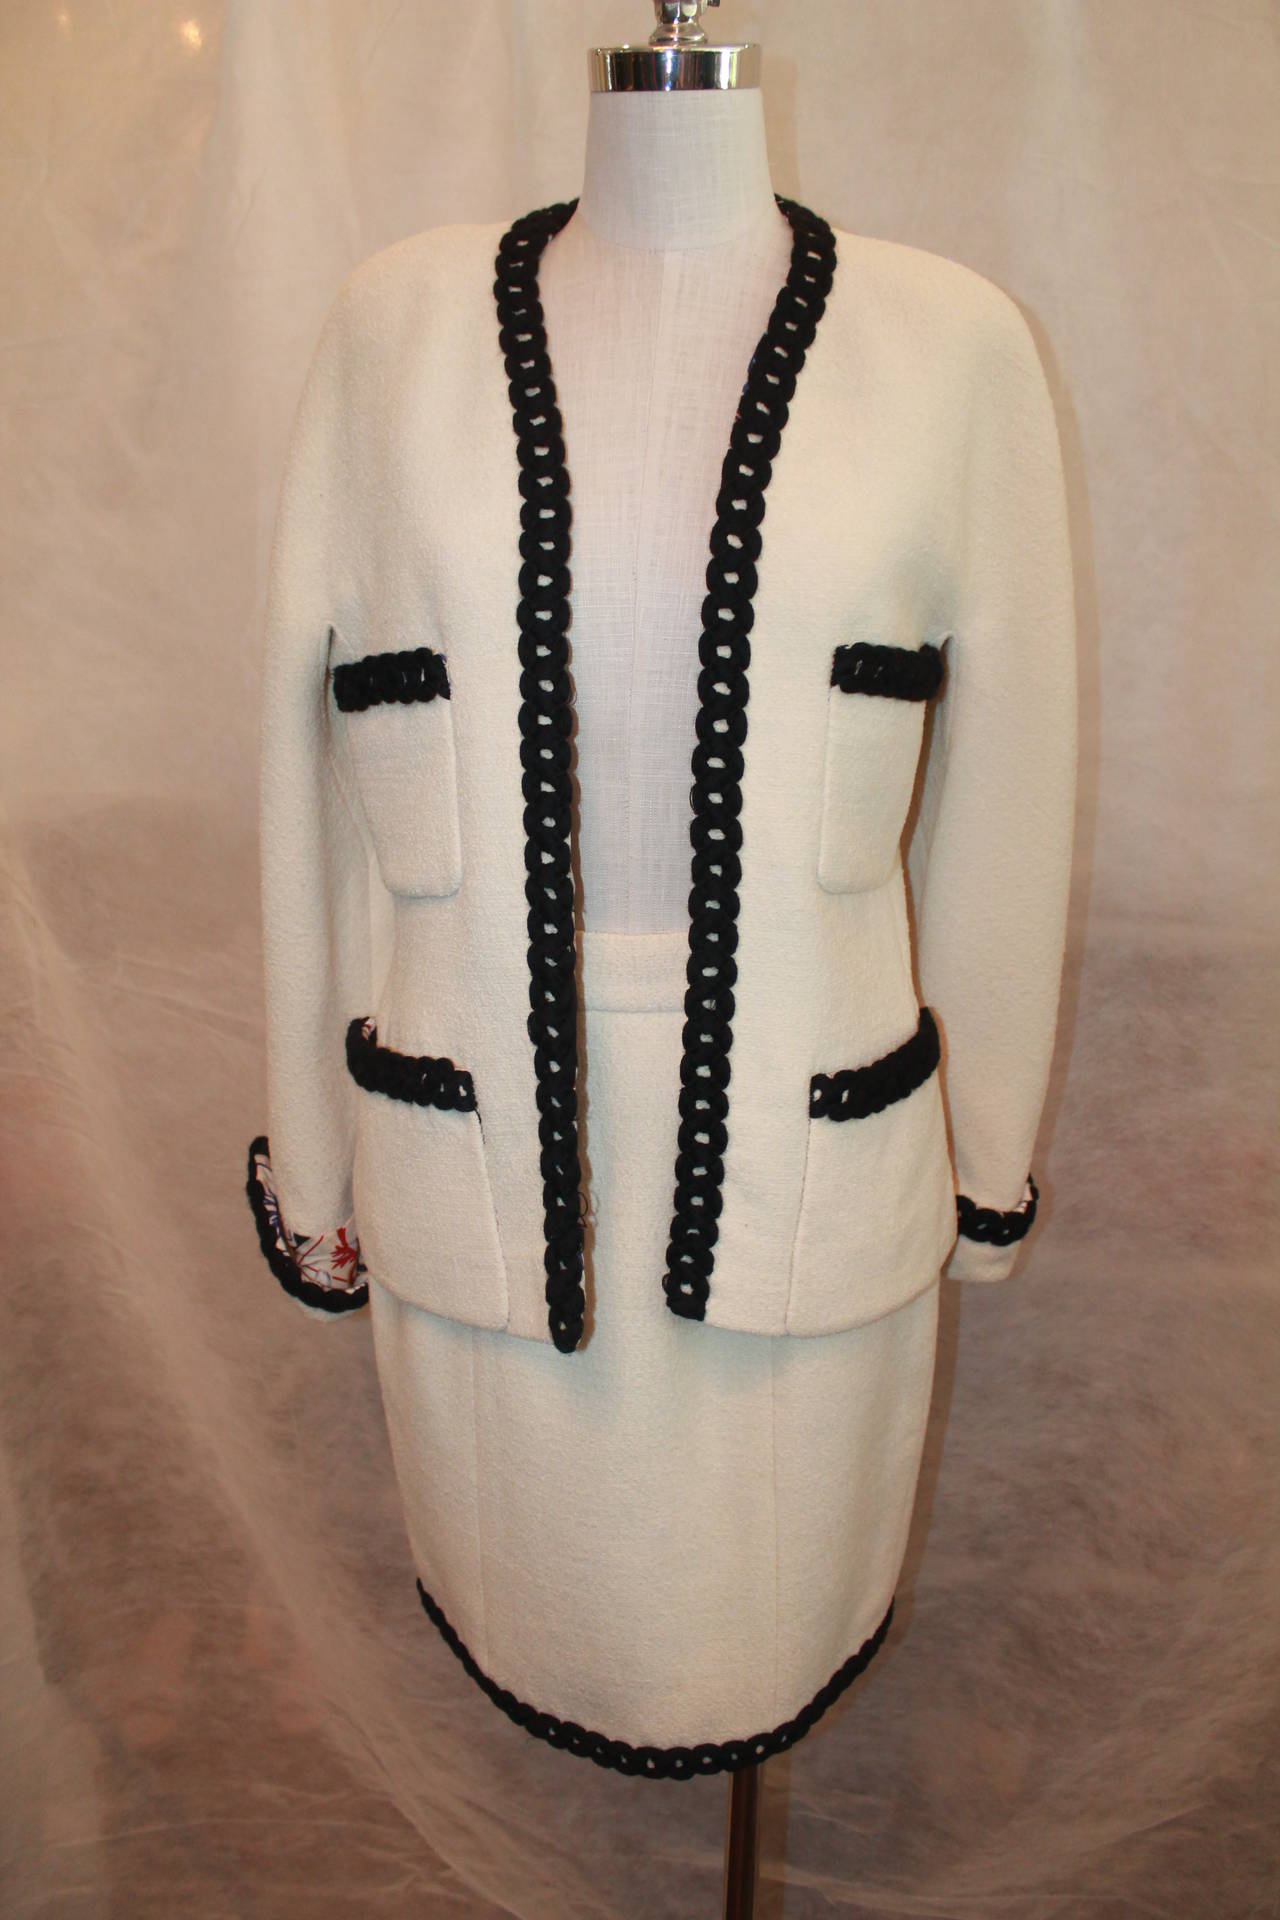 Chanel Ivory Wool Casino Theme Skirt Suit - Circa 80's-Sz 40 Black Crochet trim , Silk Print Casino Theme lining in jacket and skirt and interior of cuffs. 4 pocket front. This collectible suit is in good vintage condition.
Measurements:
Jacket: